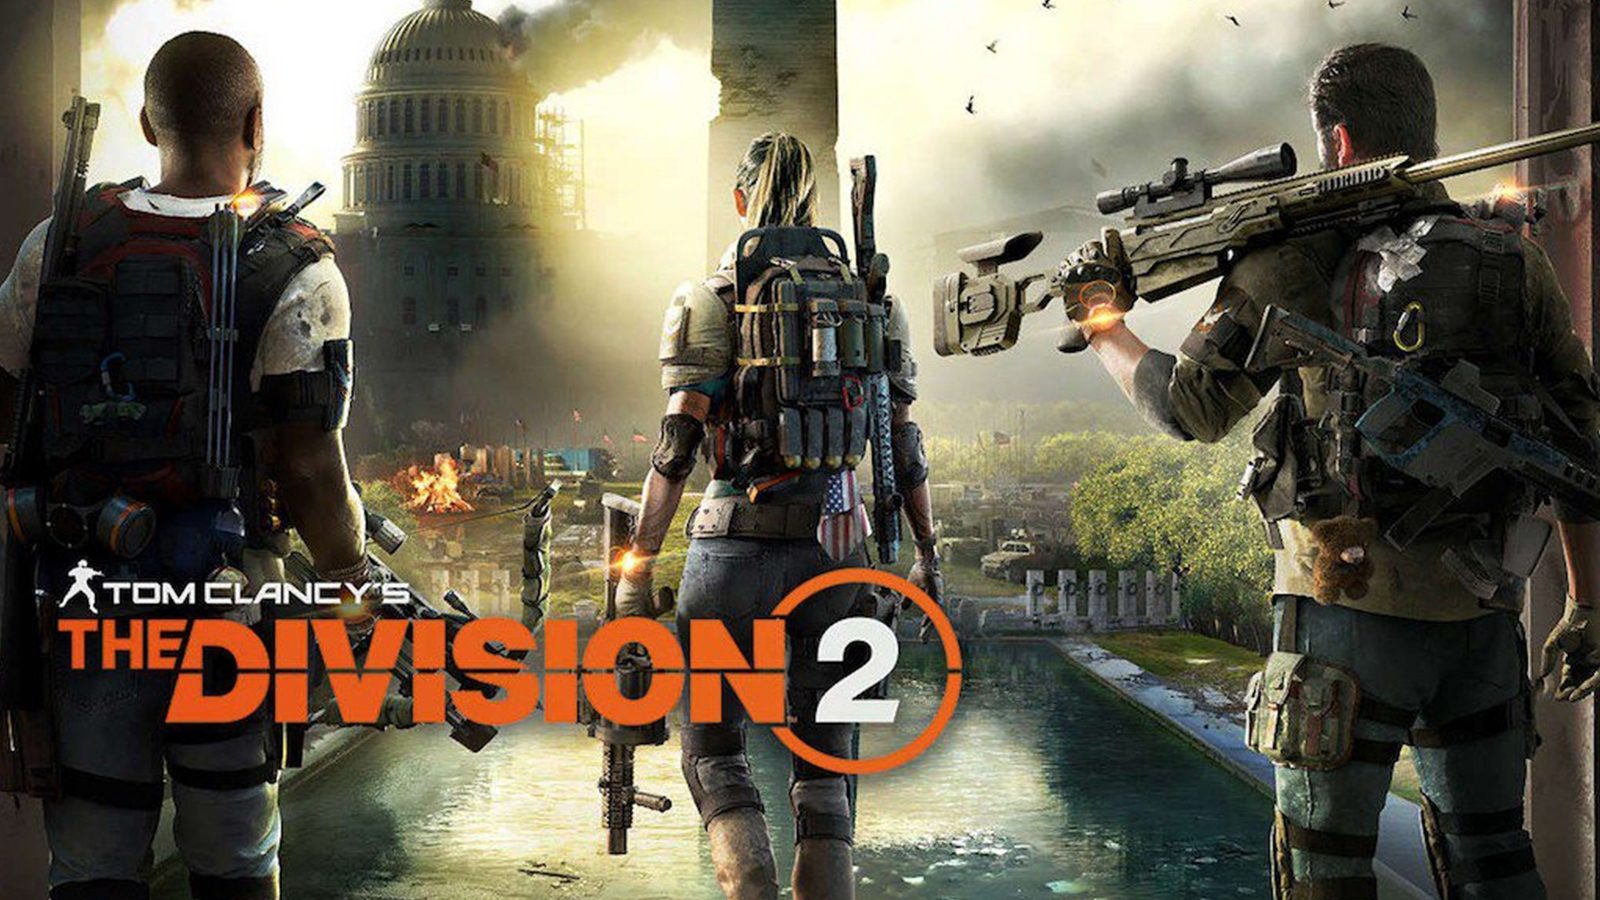 The Division 2 Walkthrough and Guide - 